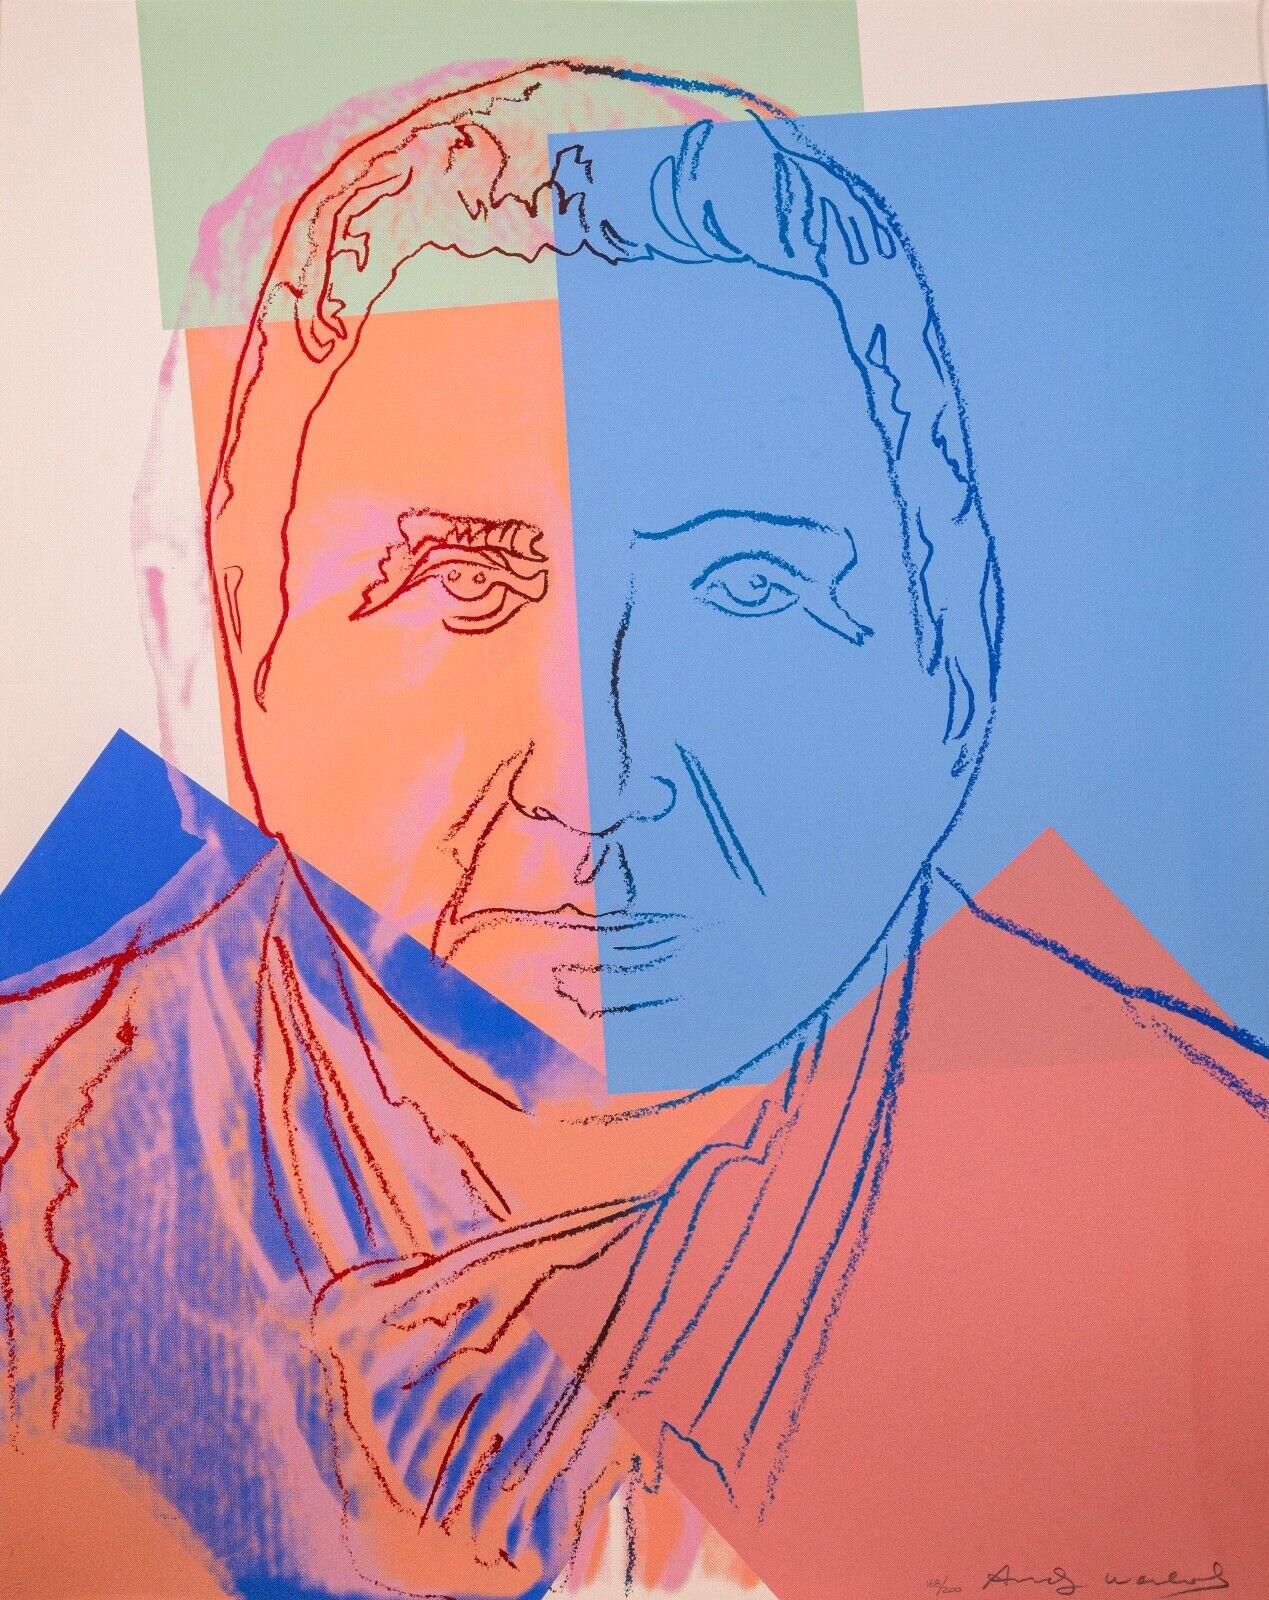 A screenprint in colors on Lenox Museum Board, titled “Gertrude Stein” by Andy Warhol. Hand signed in pencil on the bottom right with an annotation of 168/200. Blindstamp bottom left corner. Published by Rupert Jasen Smith and co-published by Ronald